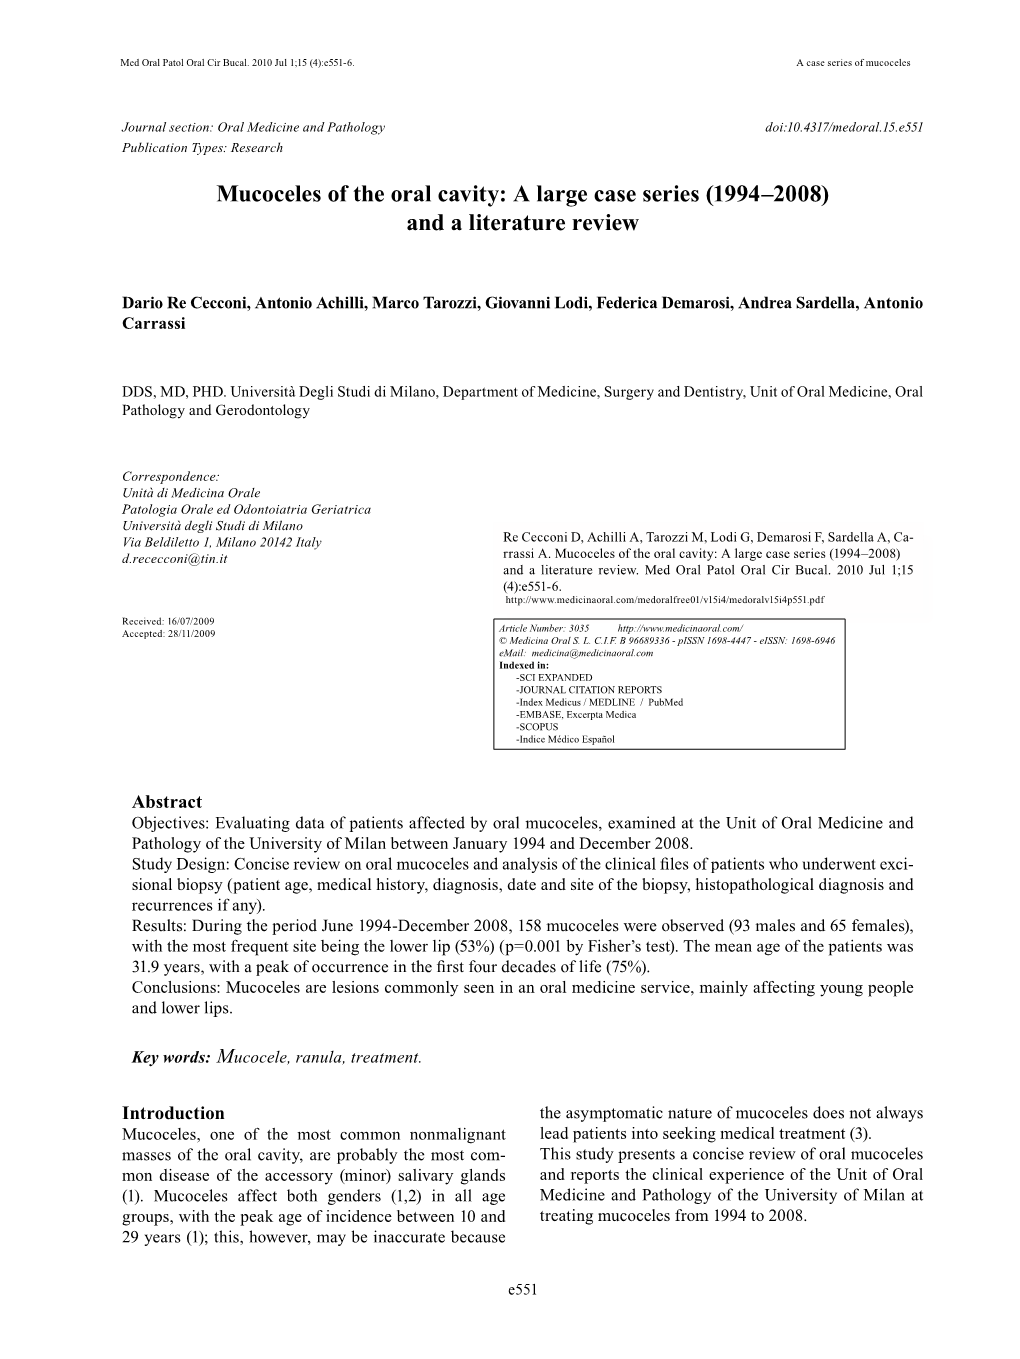 Mucoceles of the Oral Cavity: a Large Case Series (1994–2008) and a Literature Review